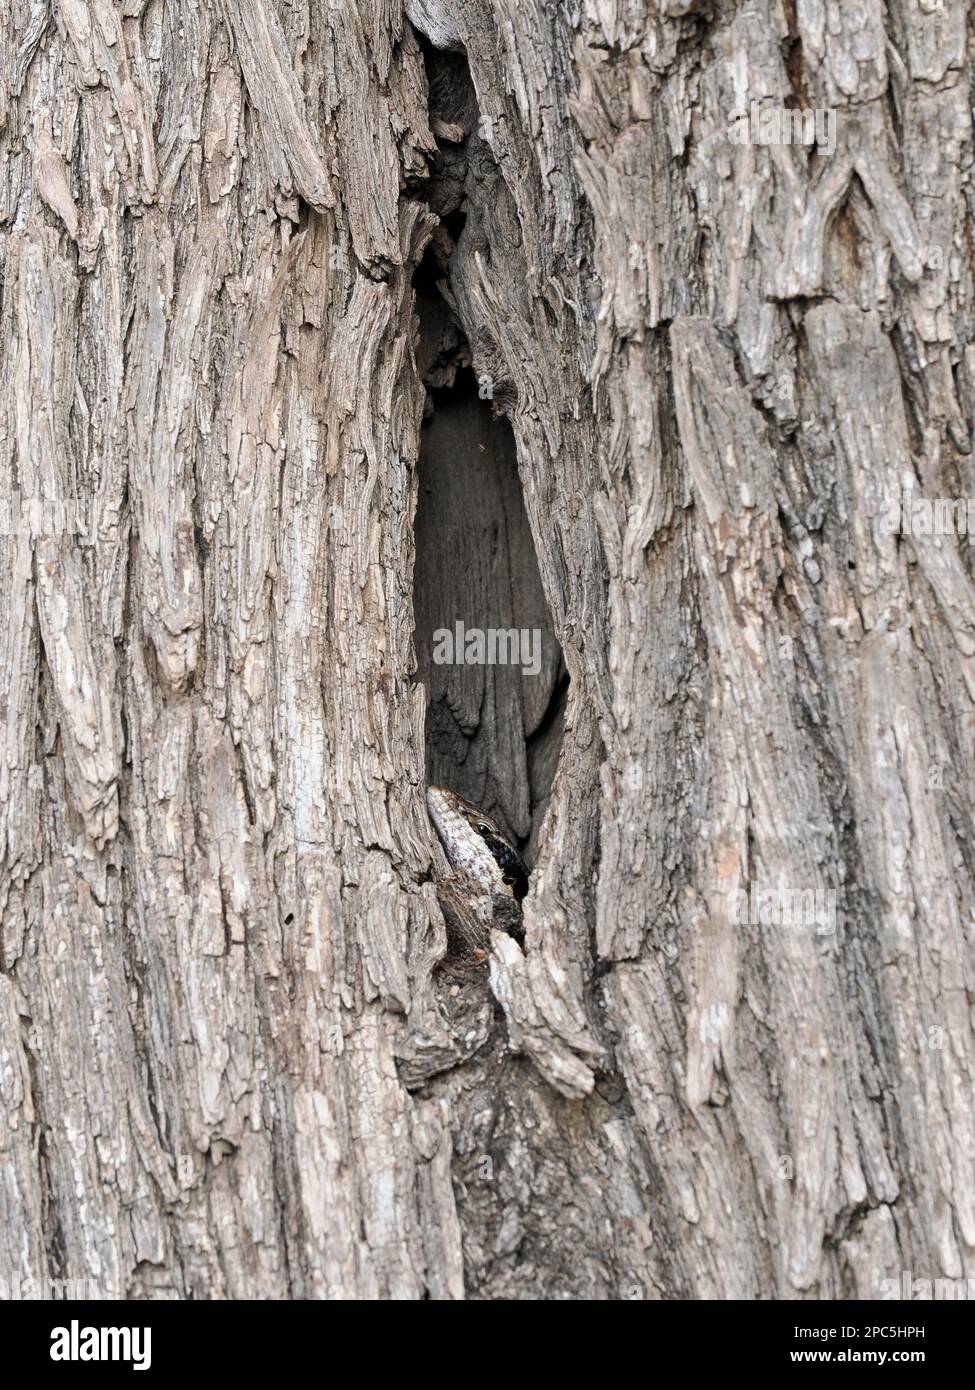 Ovambo Tree Skink (Trachylepis binotata) adult peering out of crevice in old tree trunk, Namibia, January Stock Photo